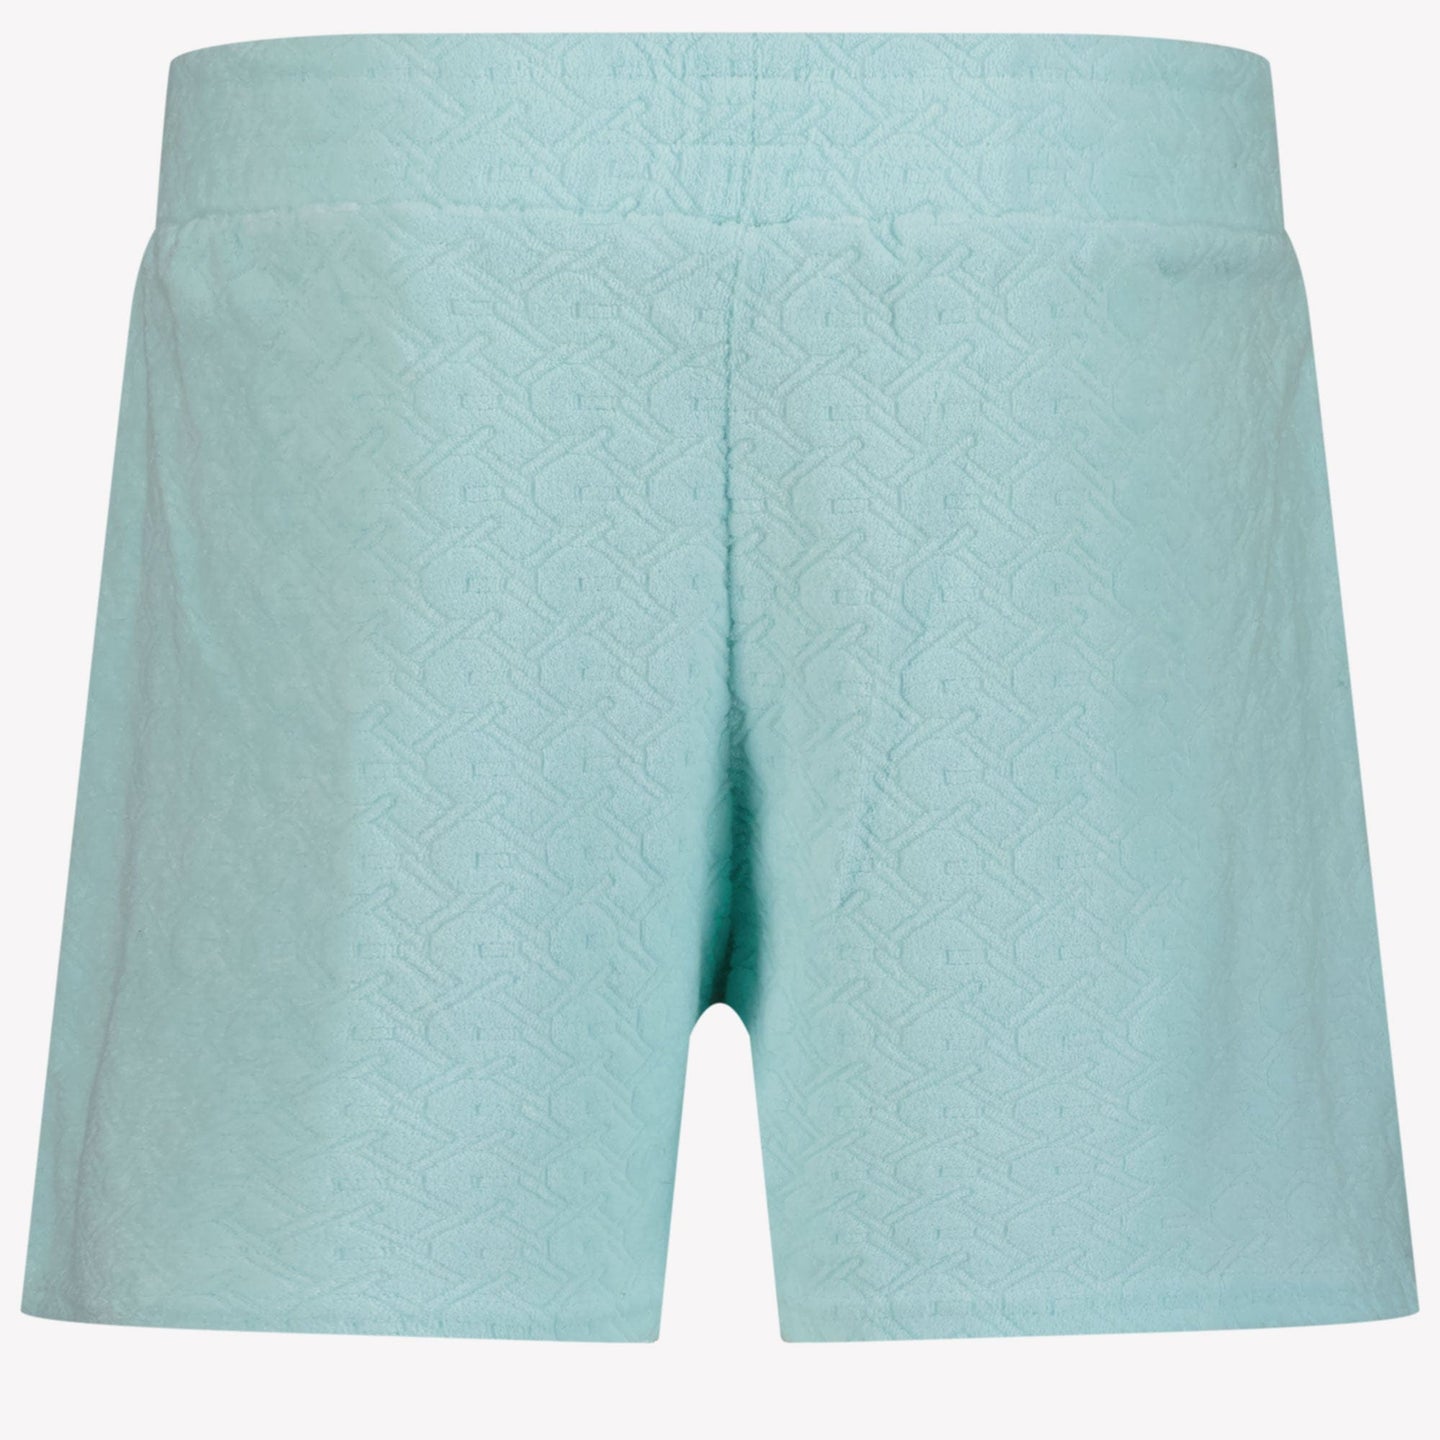 Guess Kinder Meisjes Shorts Turquoise 8Y